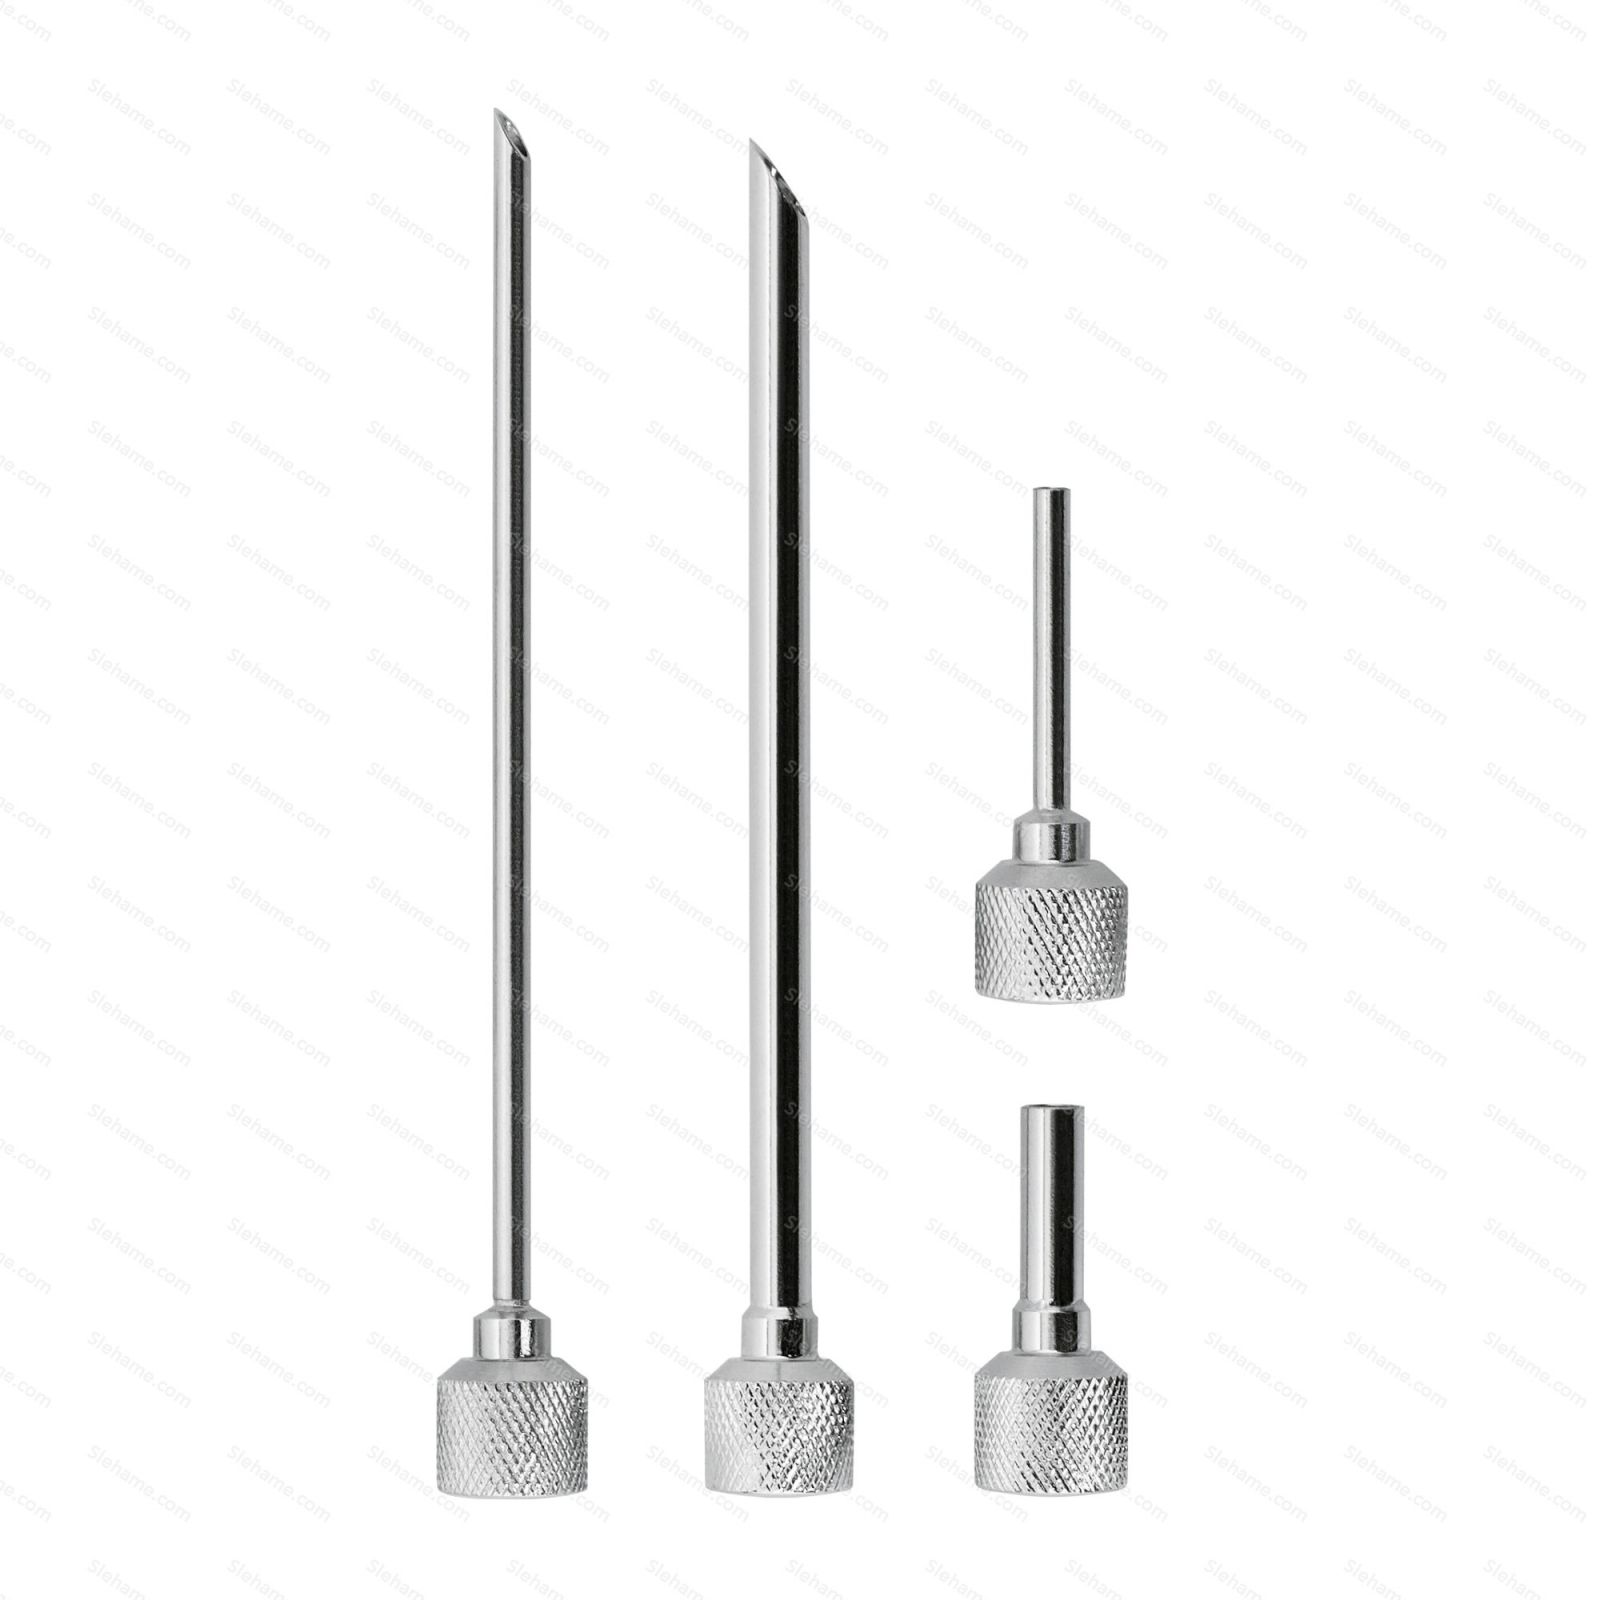 Decorator & injector tips Kayser, 4 pcs - front view